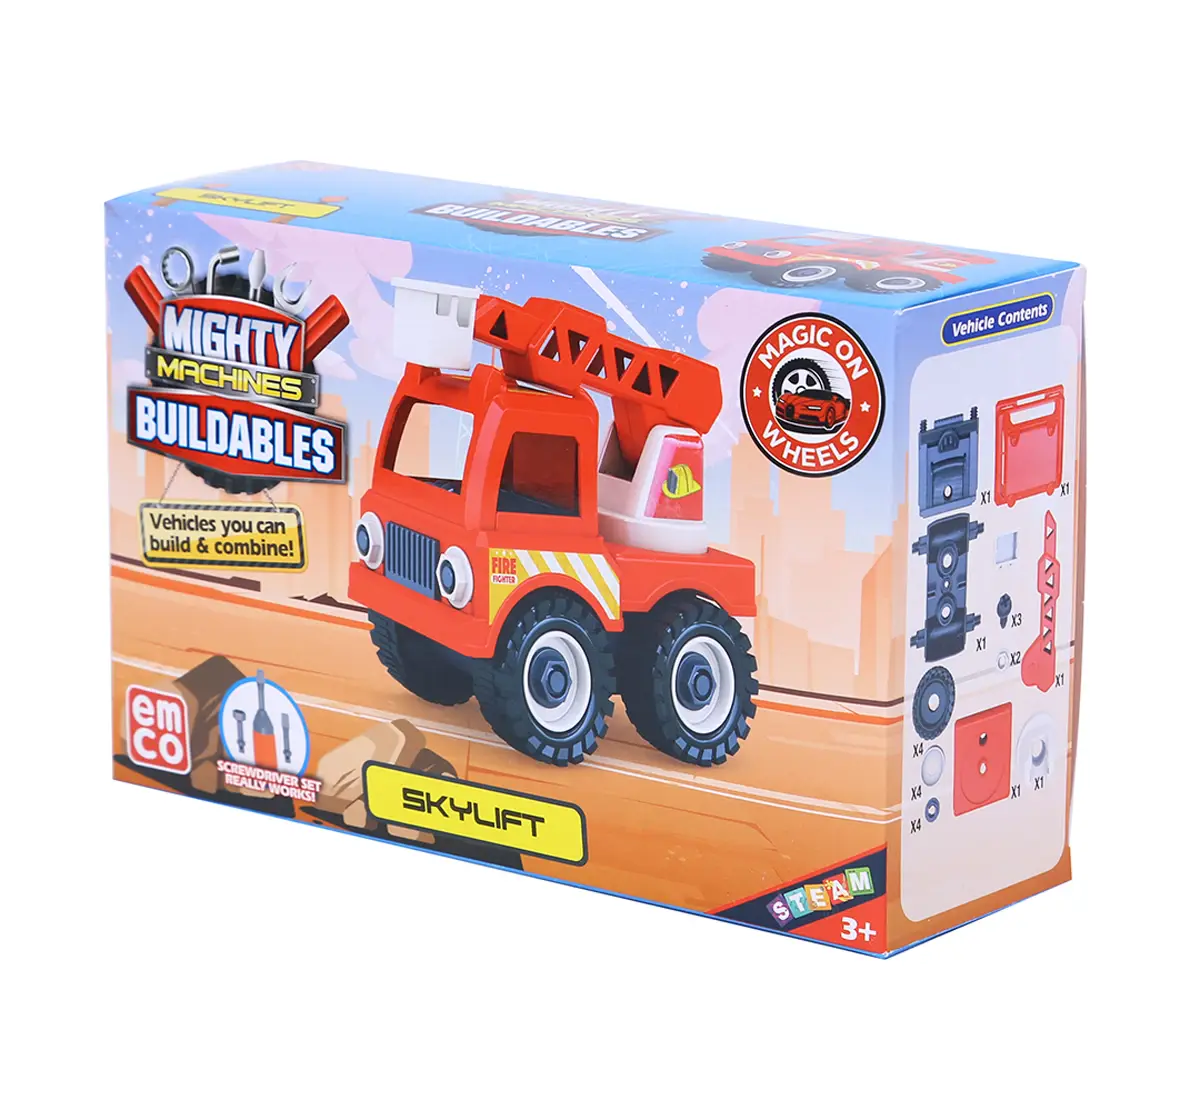 Mighty Machines Skylift Construction Vechile for kids 3Y+, Multicolour